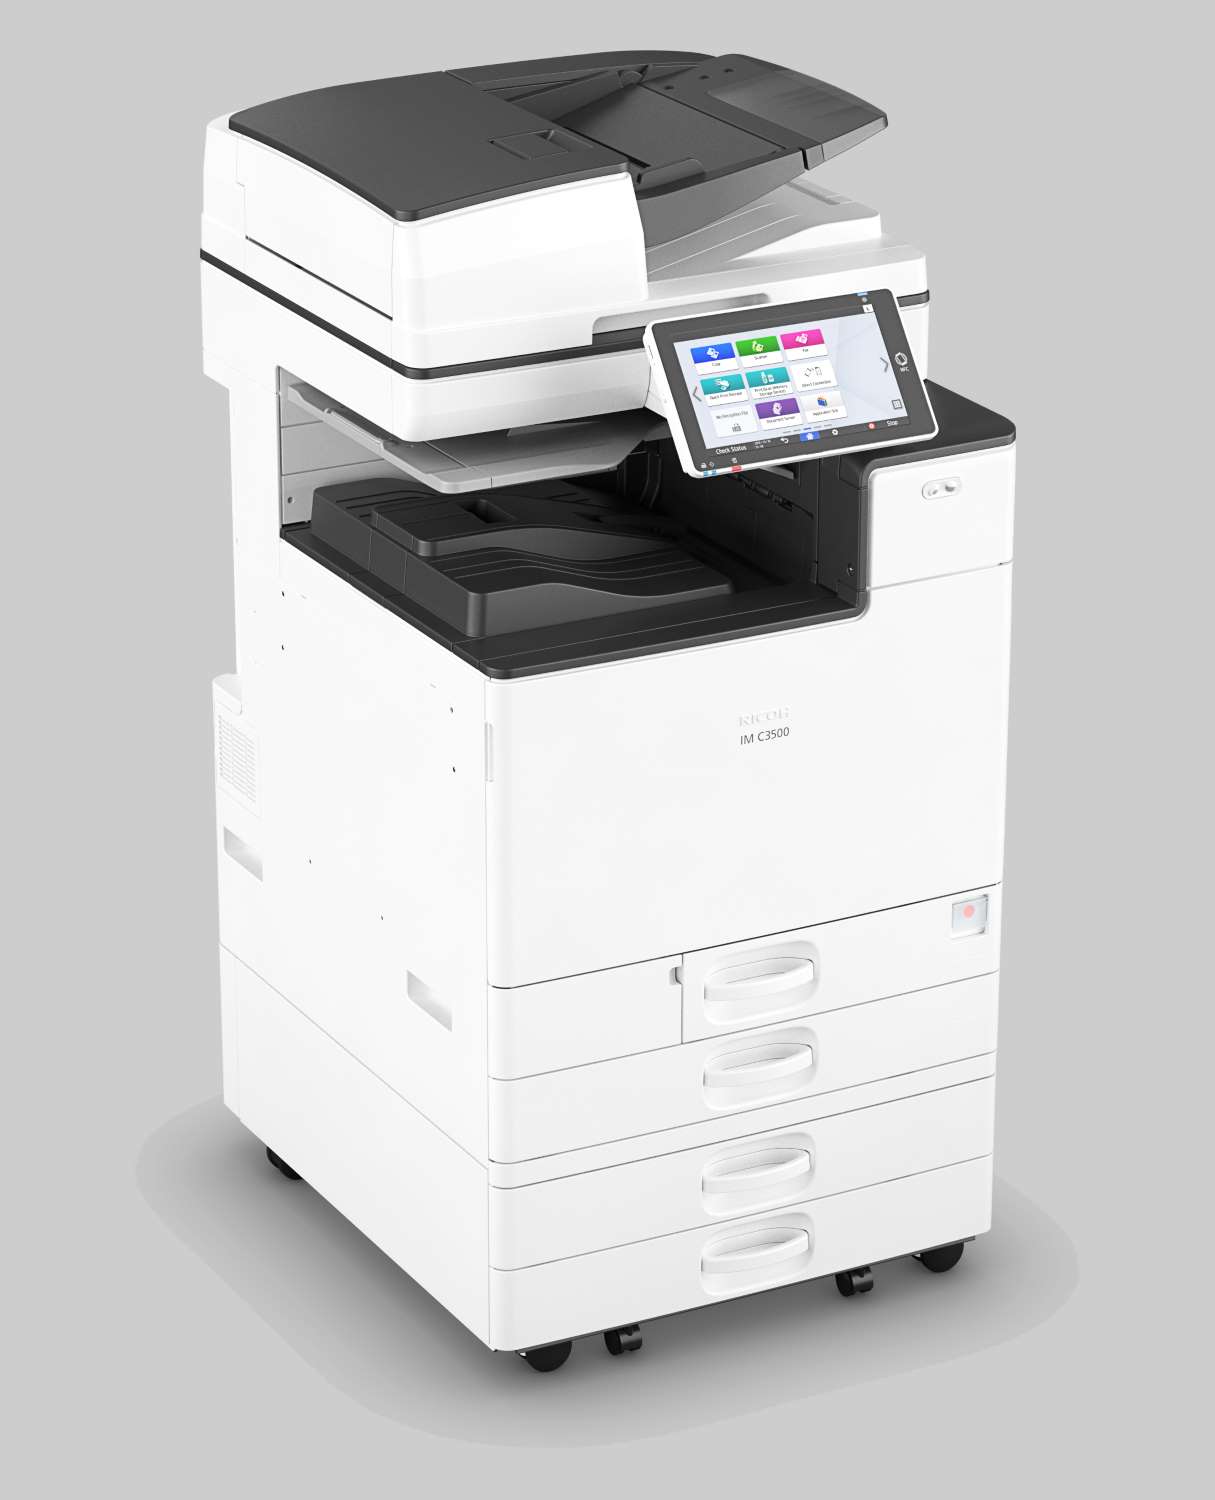 Tech4 Office Equipment in Carlisle, suppliers of A3 Printer Scanners across Cumbria & the Borders